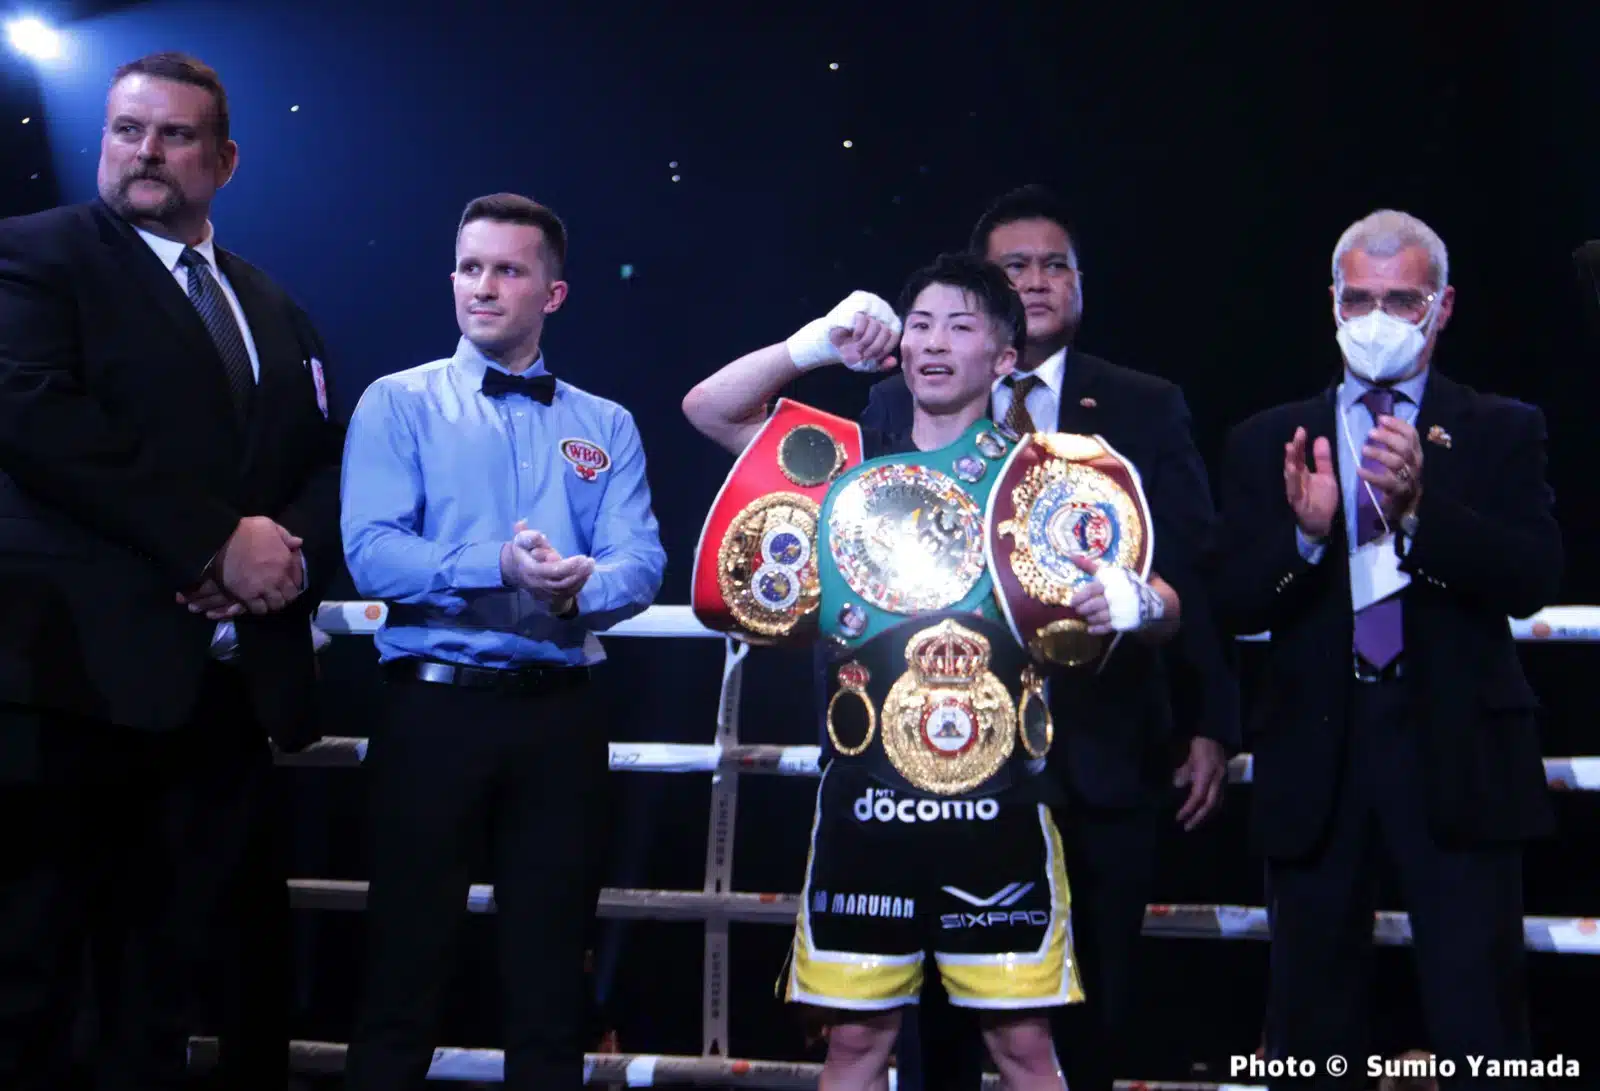 Image: Naoya Inoue injured, May 7th fight with Stephen Fulton postponed